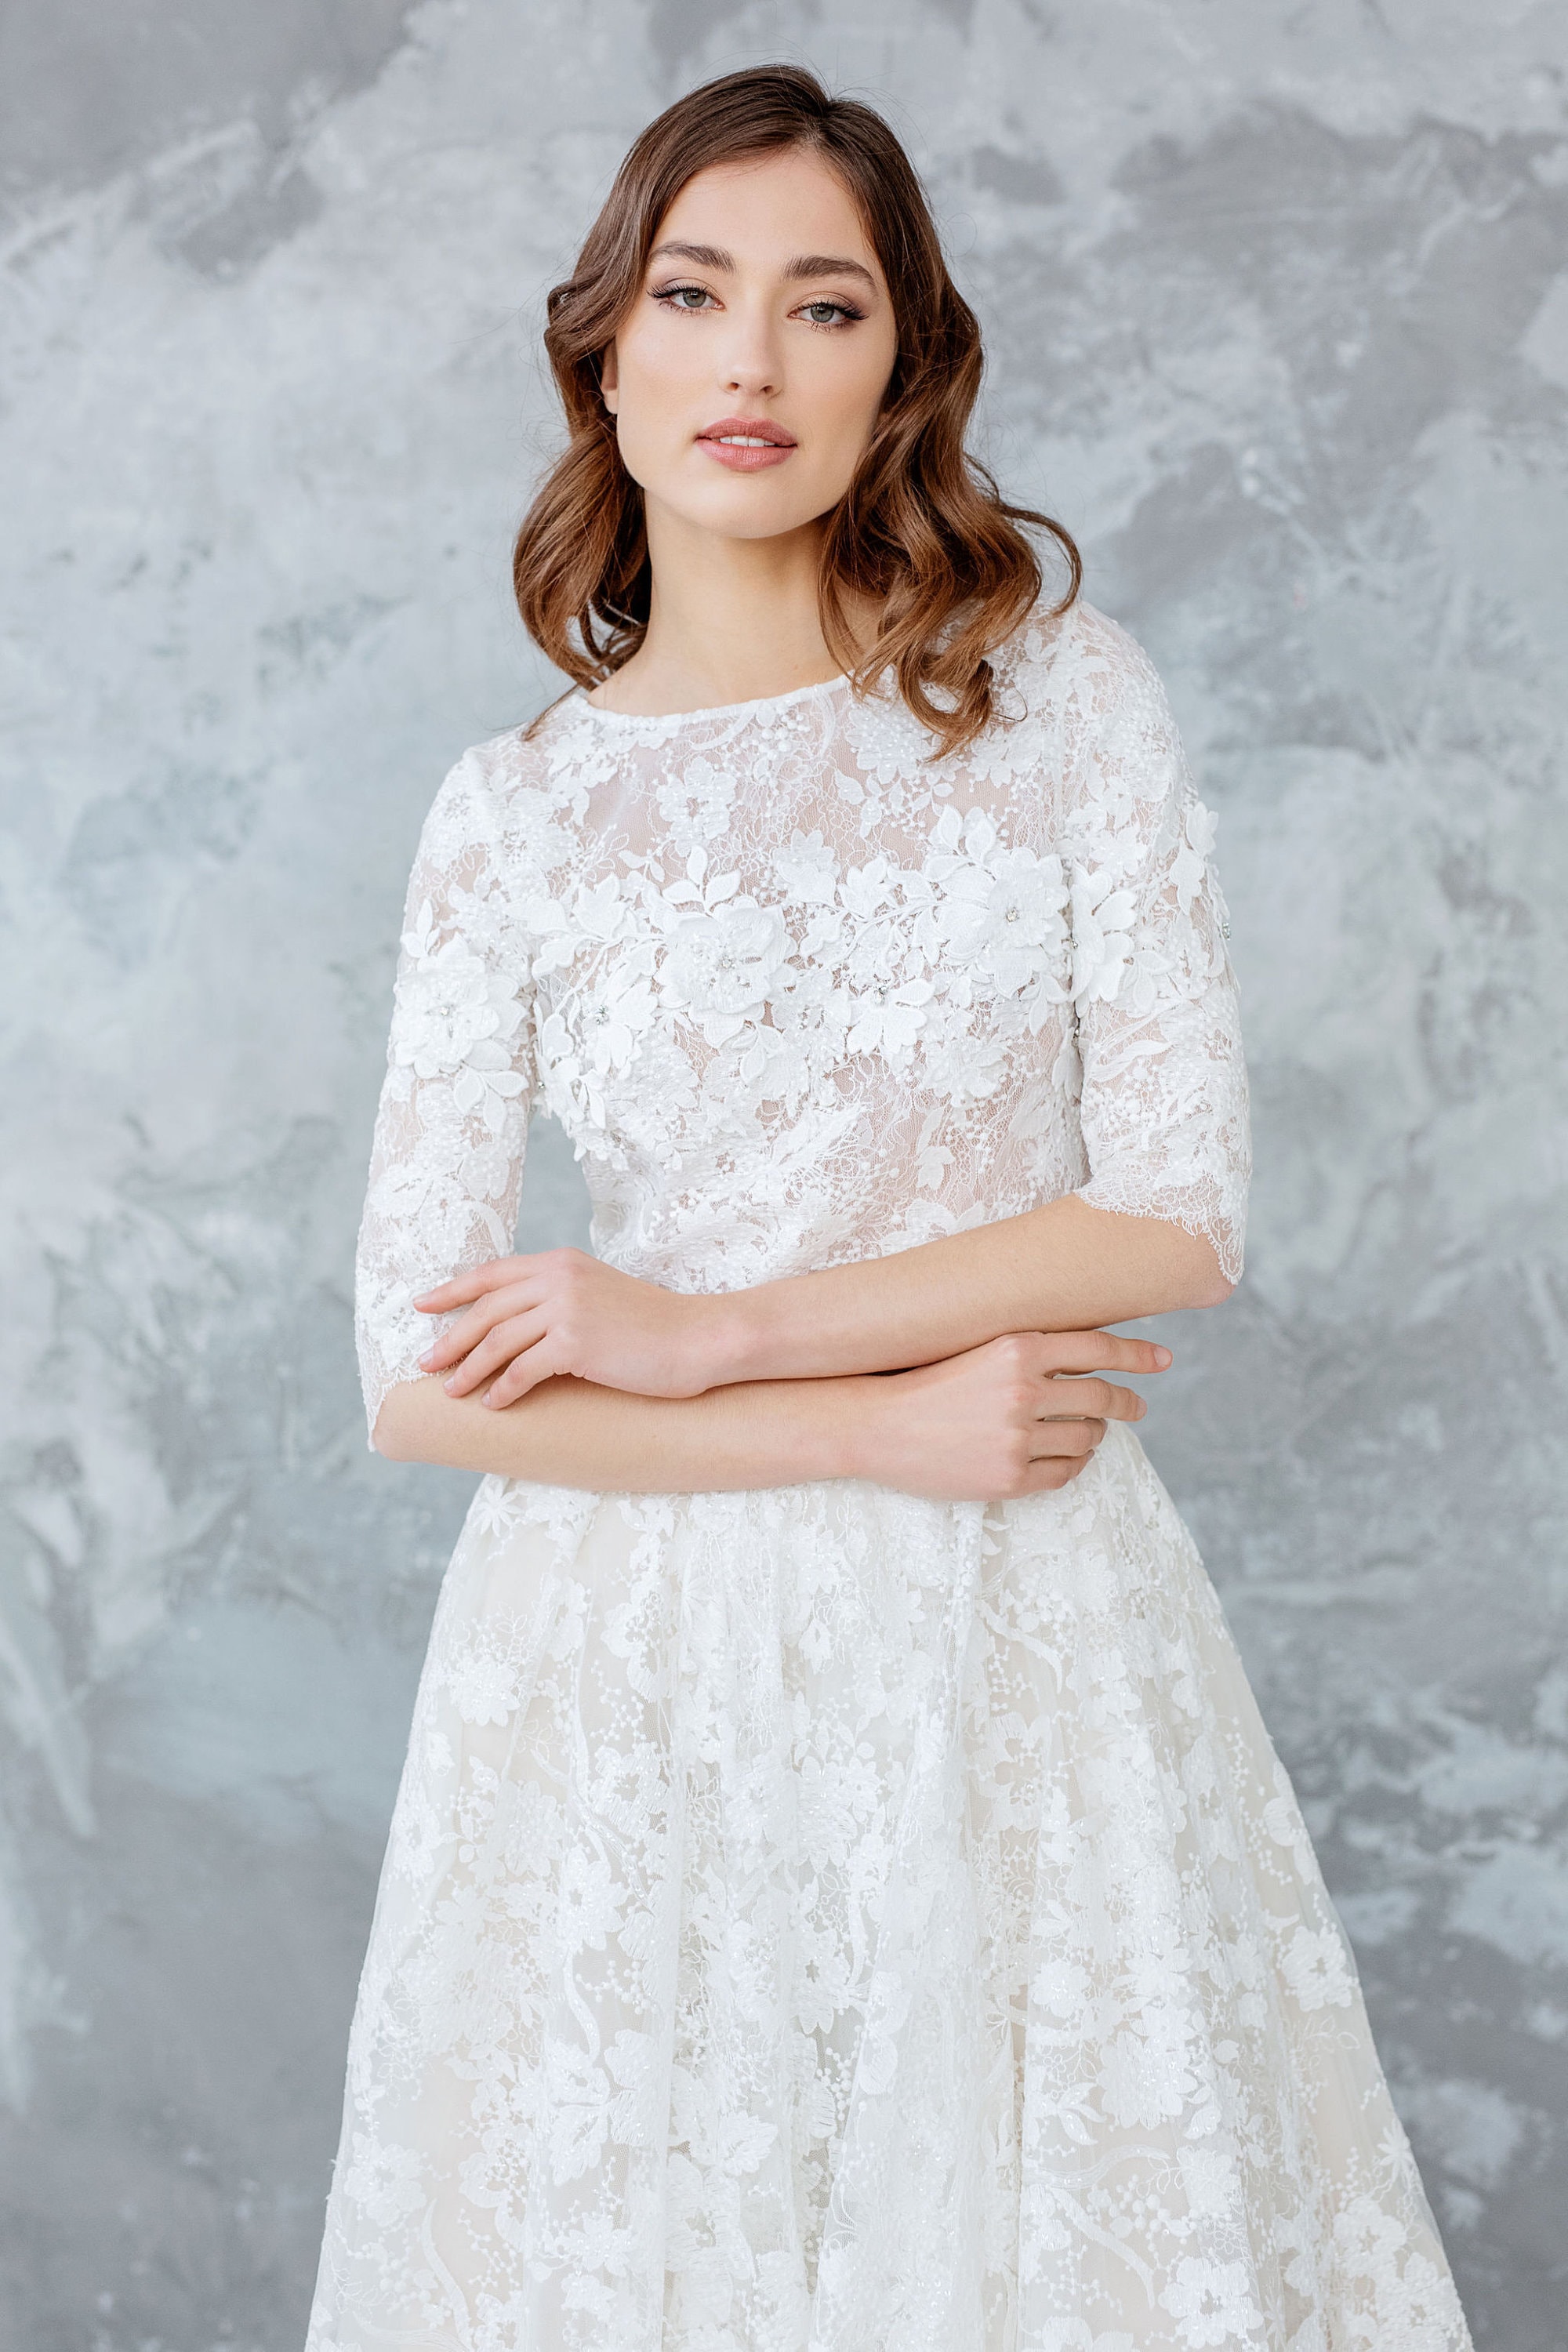 Minimalist Modern Lace Bridal Top Long Sleeve Bolero with 3D Flower Embroidered Lace Bridal Lace Top Separates with Long Sleeves